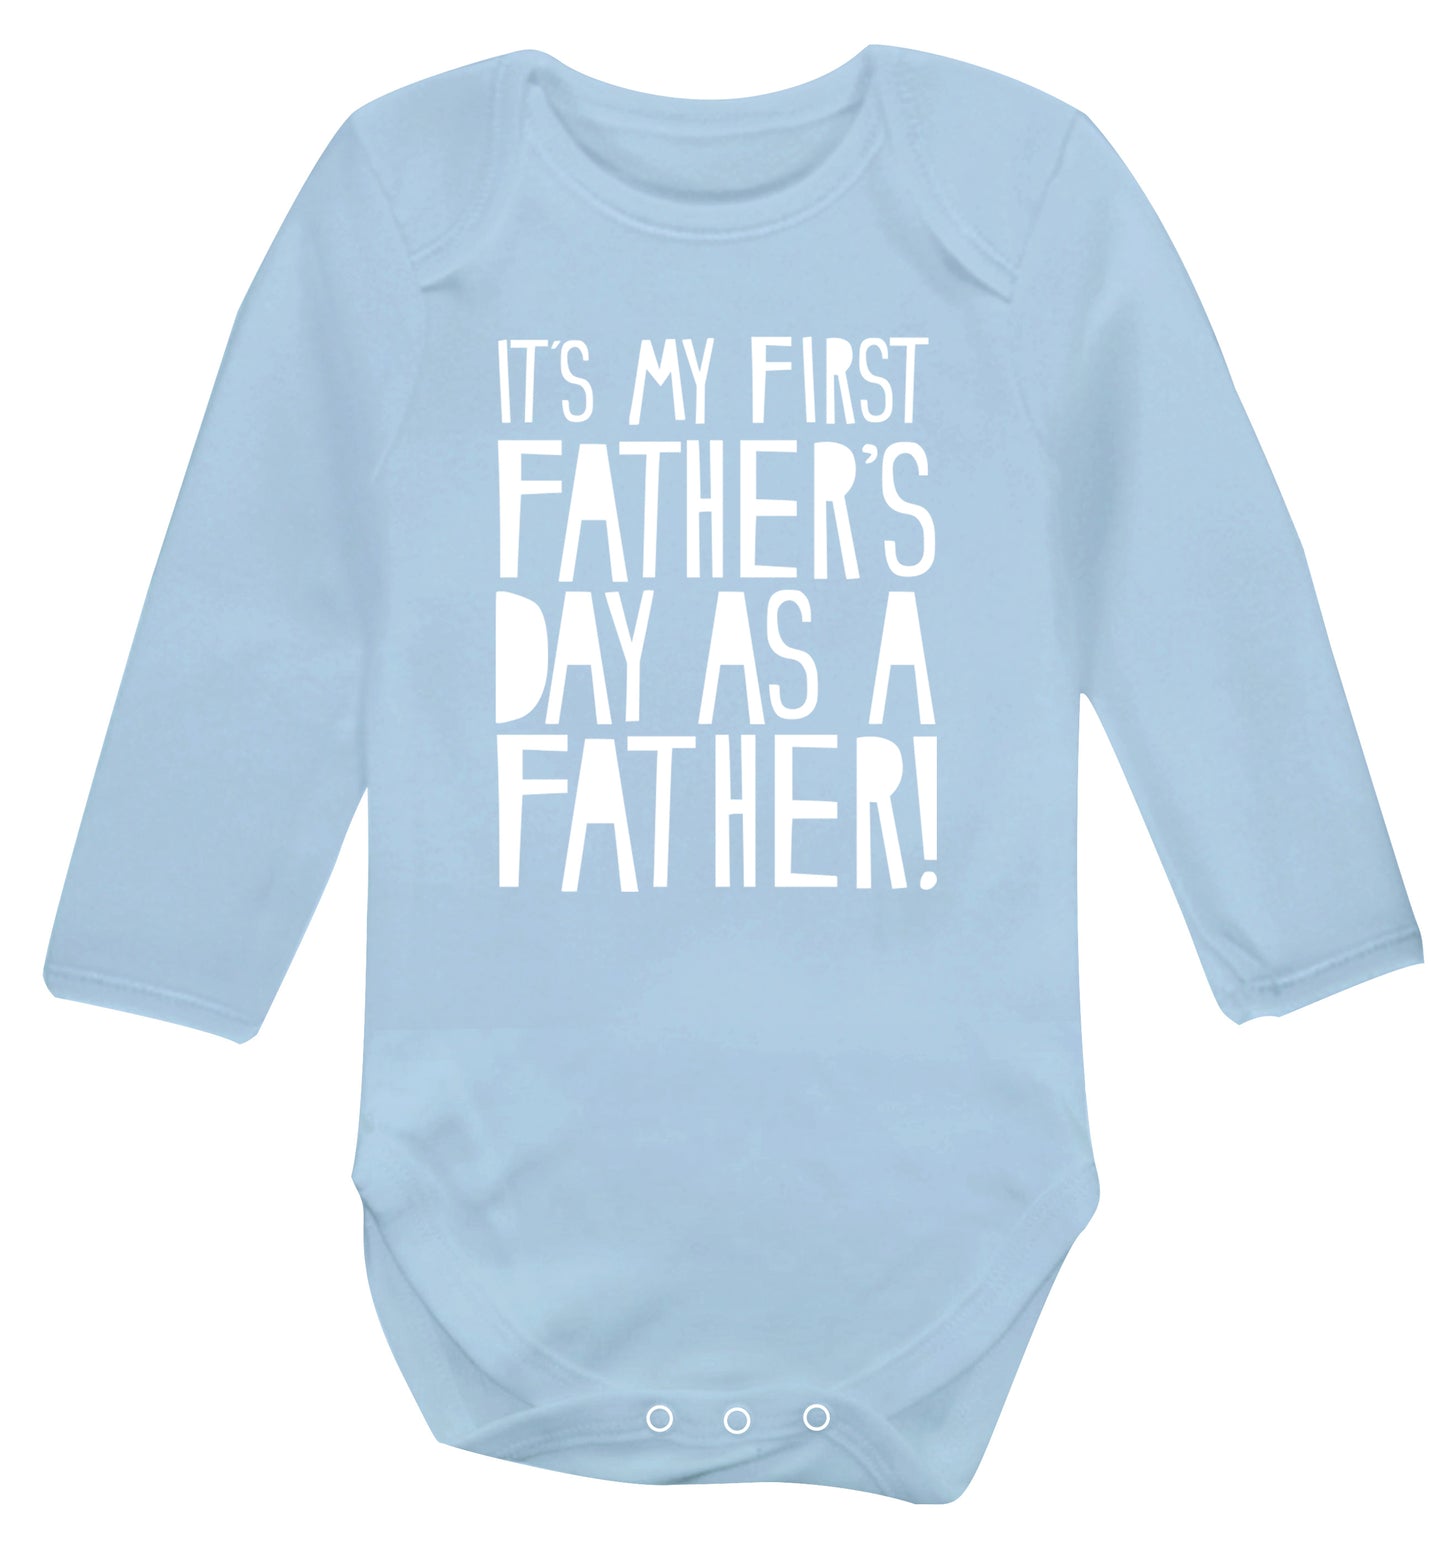 It's my first Father's Day as a father! Baby Vest long sleeved pale blue 6-12 months